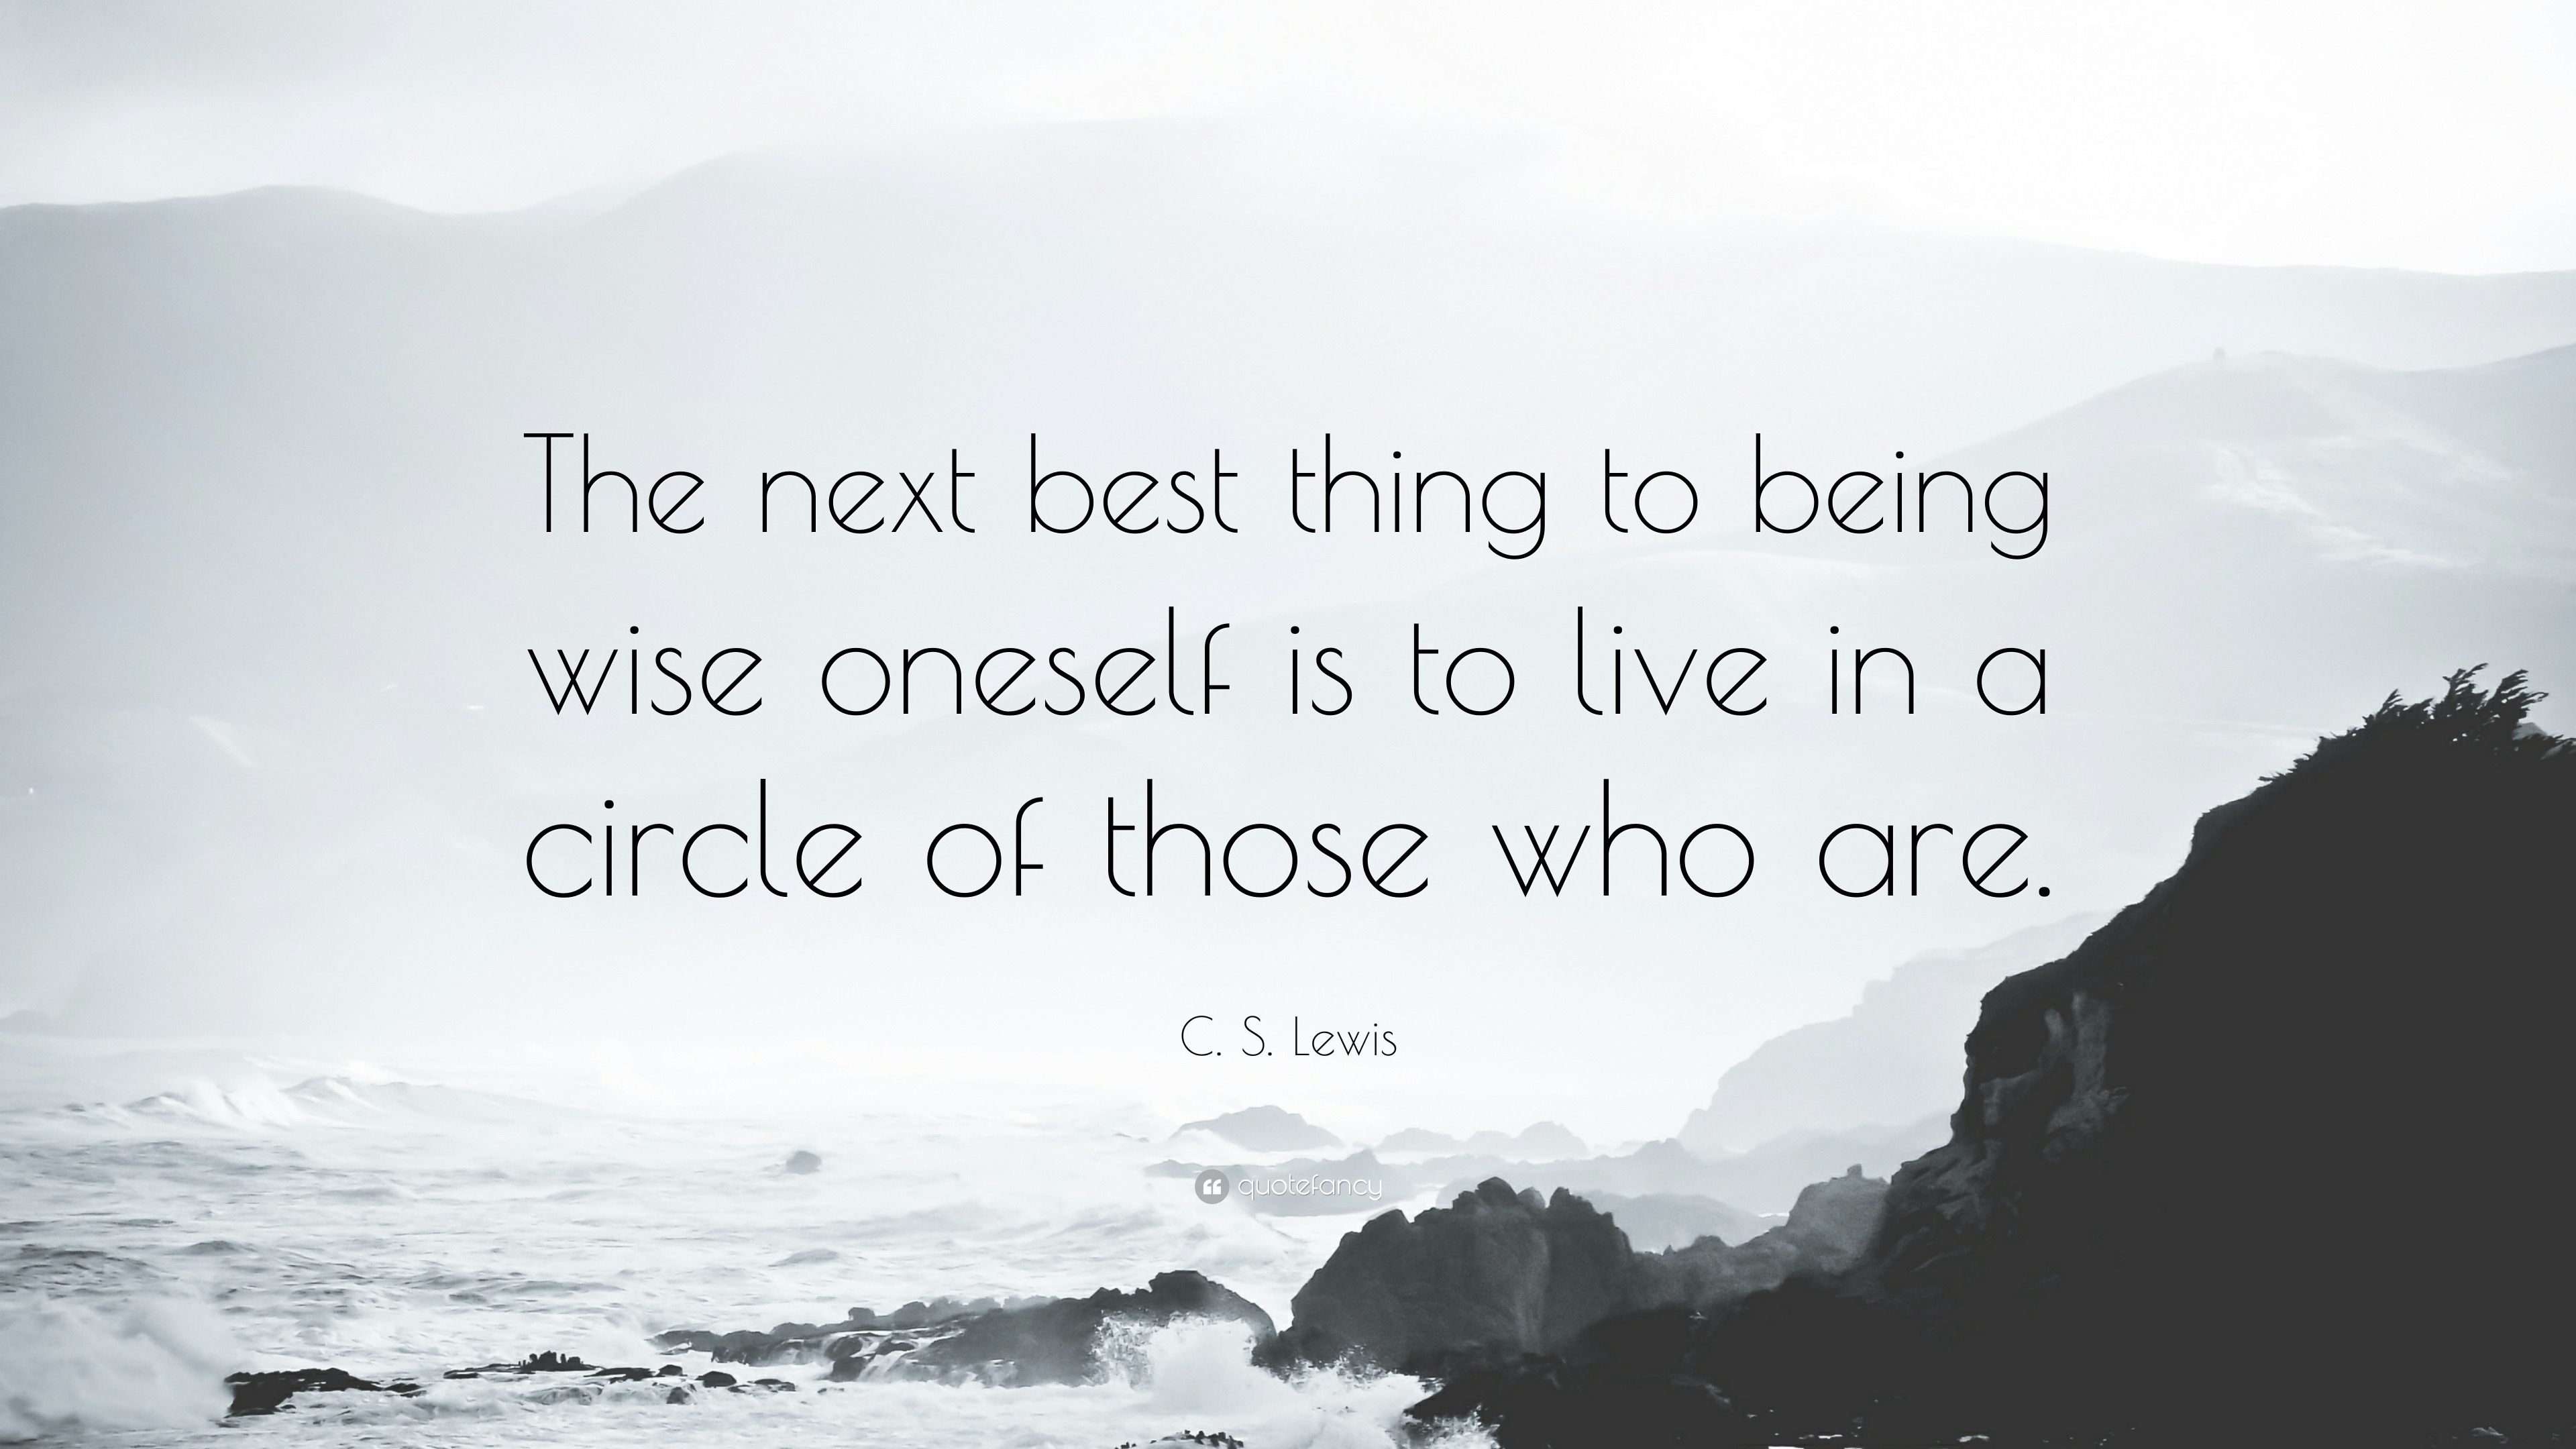 C S Lewis Quote “the Next Best Thing To Being Wise Oneself Is To